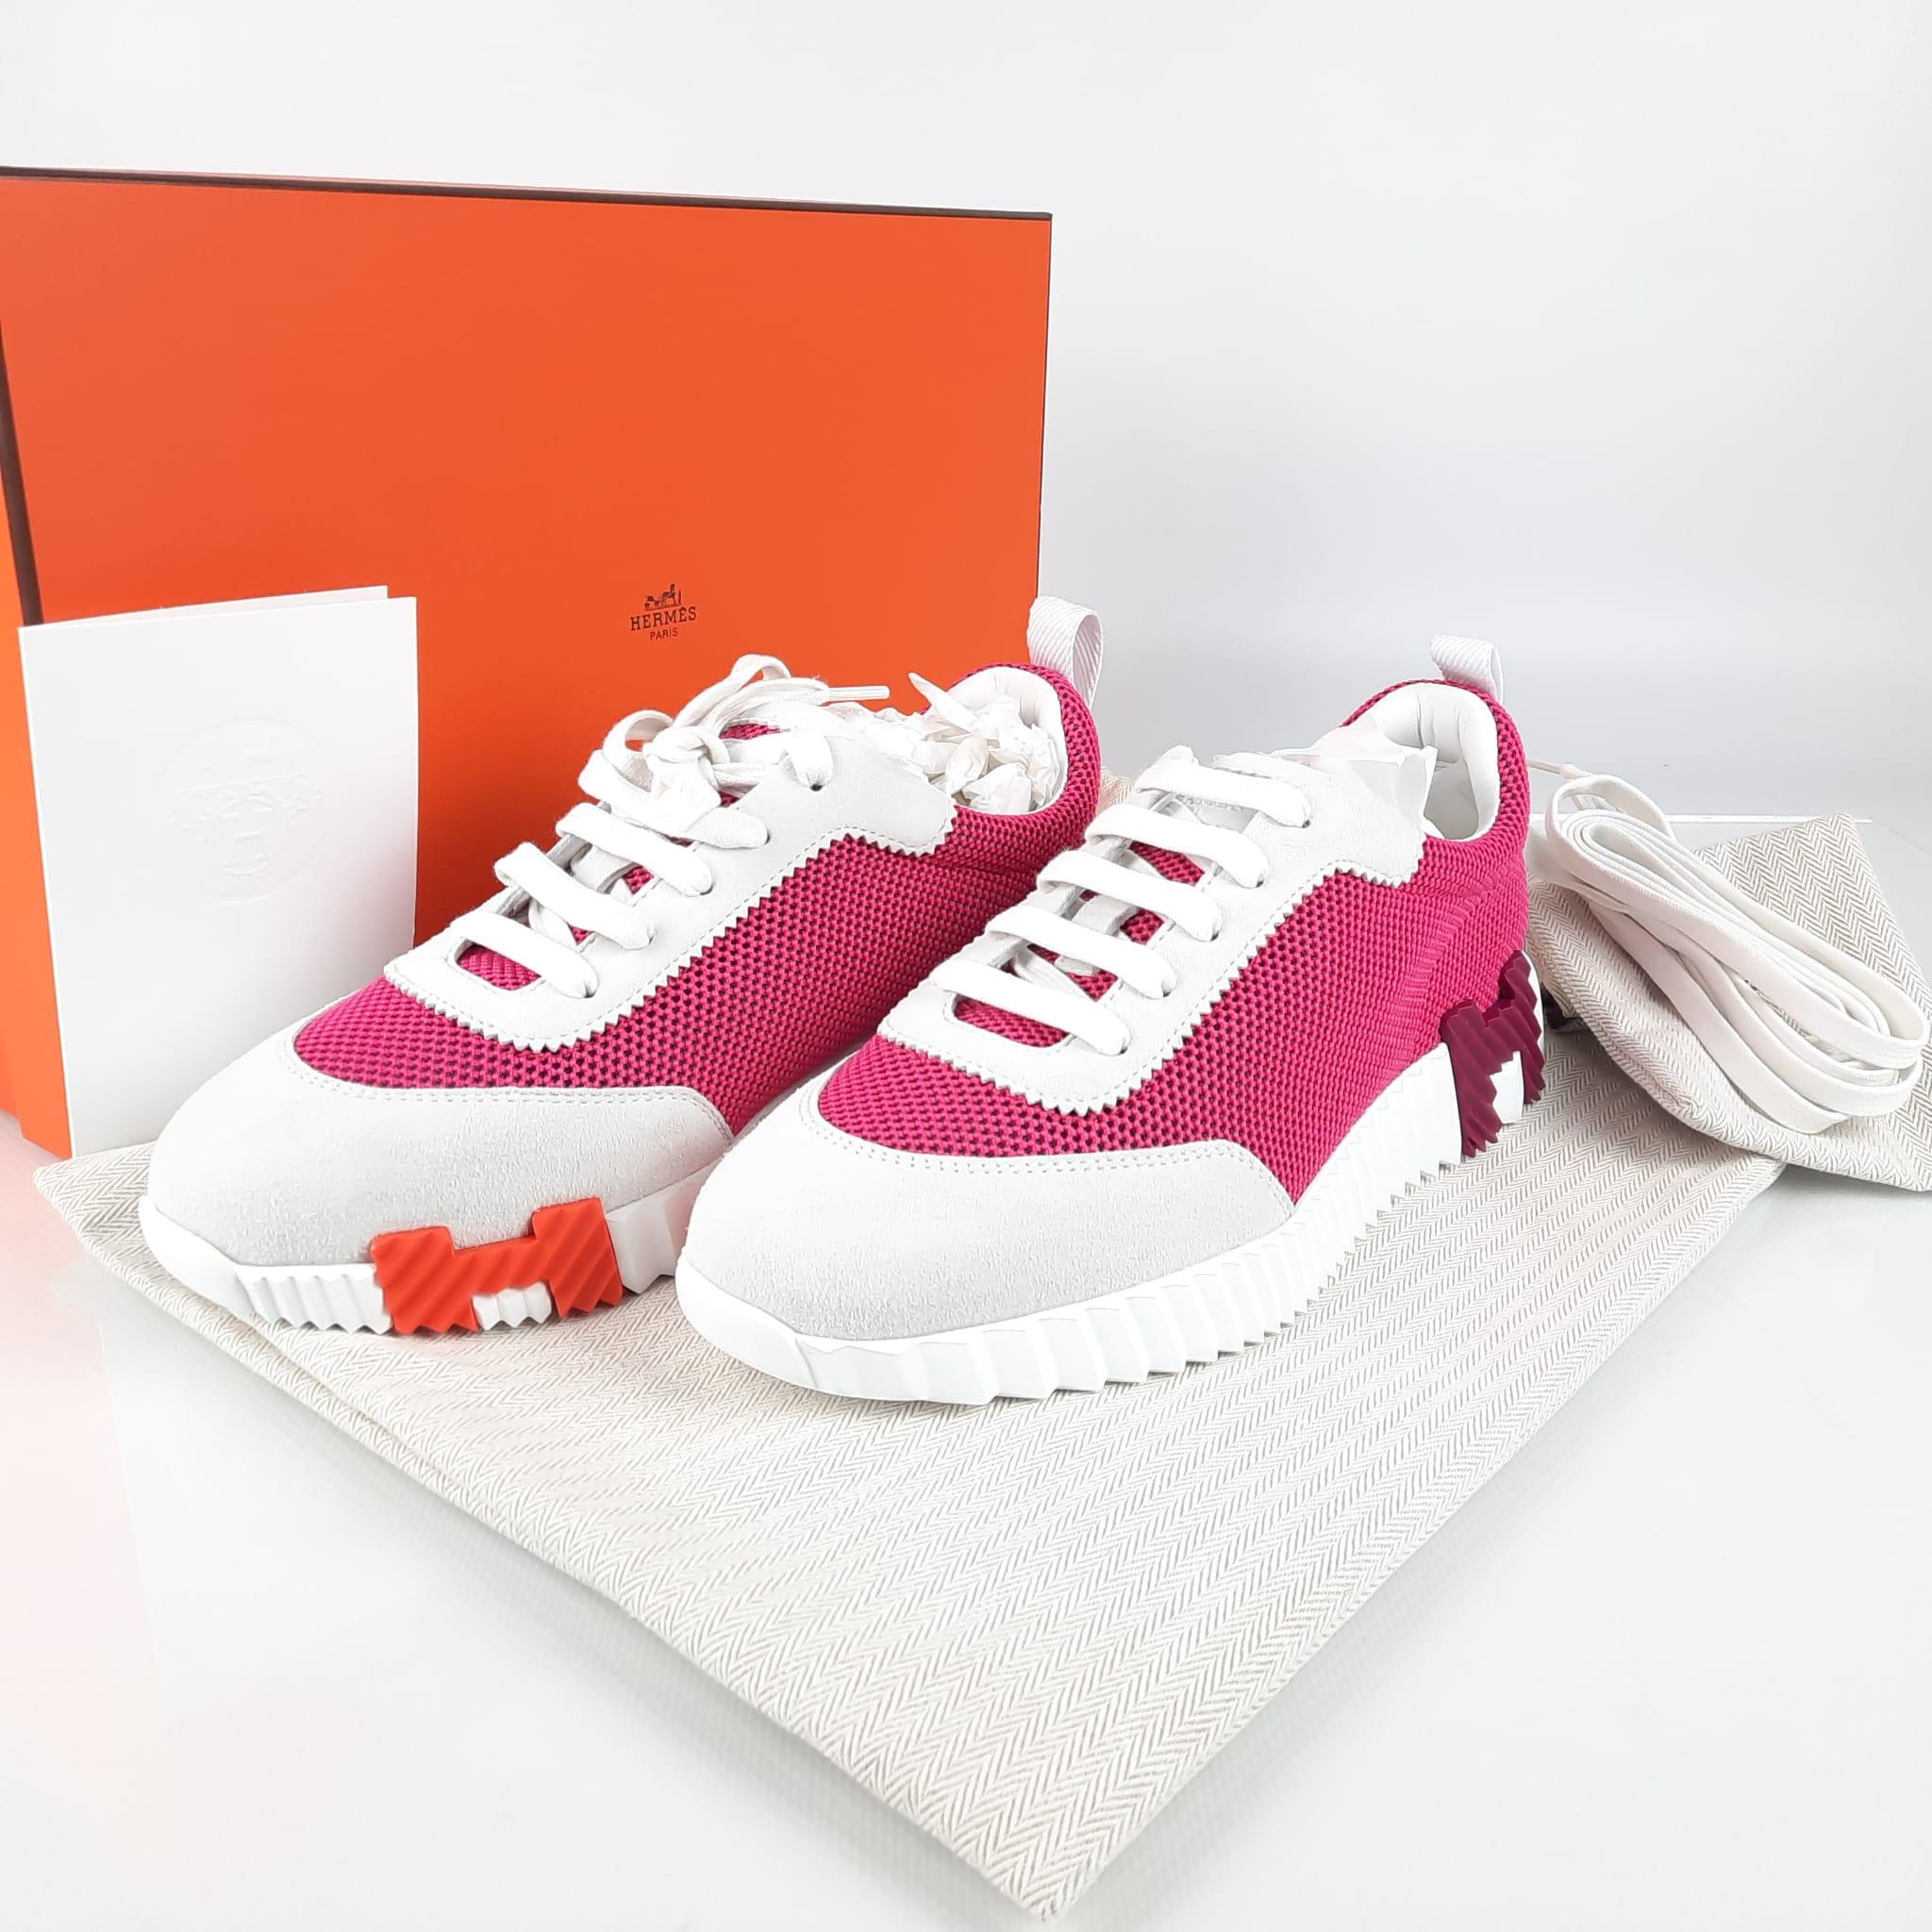 Hermes Bouncing Sneakers Color Vinicunca Pink / White Size 39  10